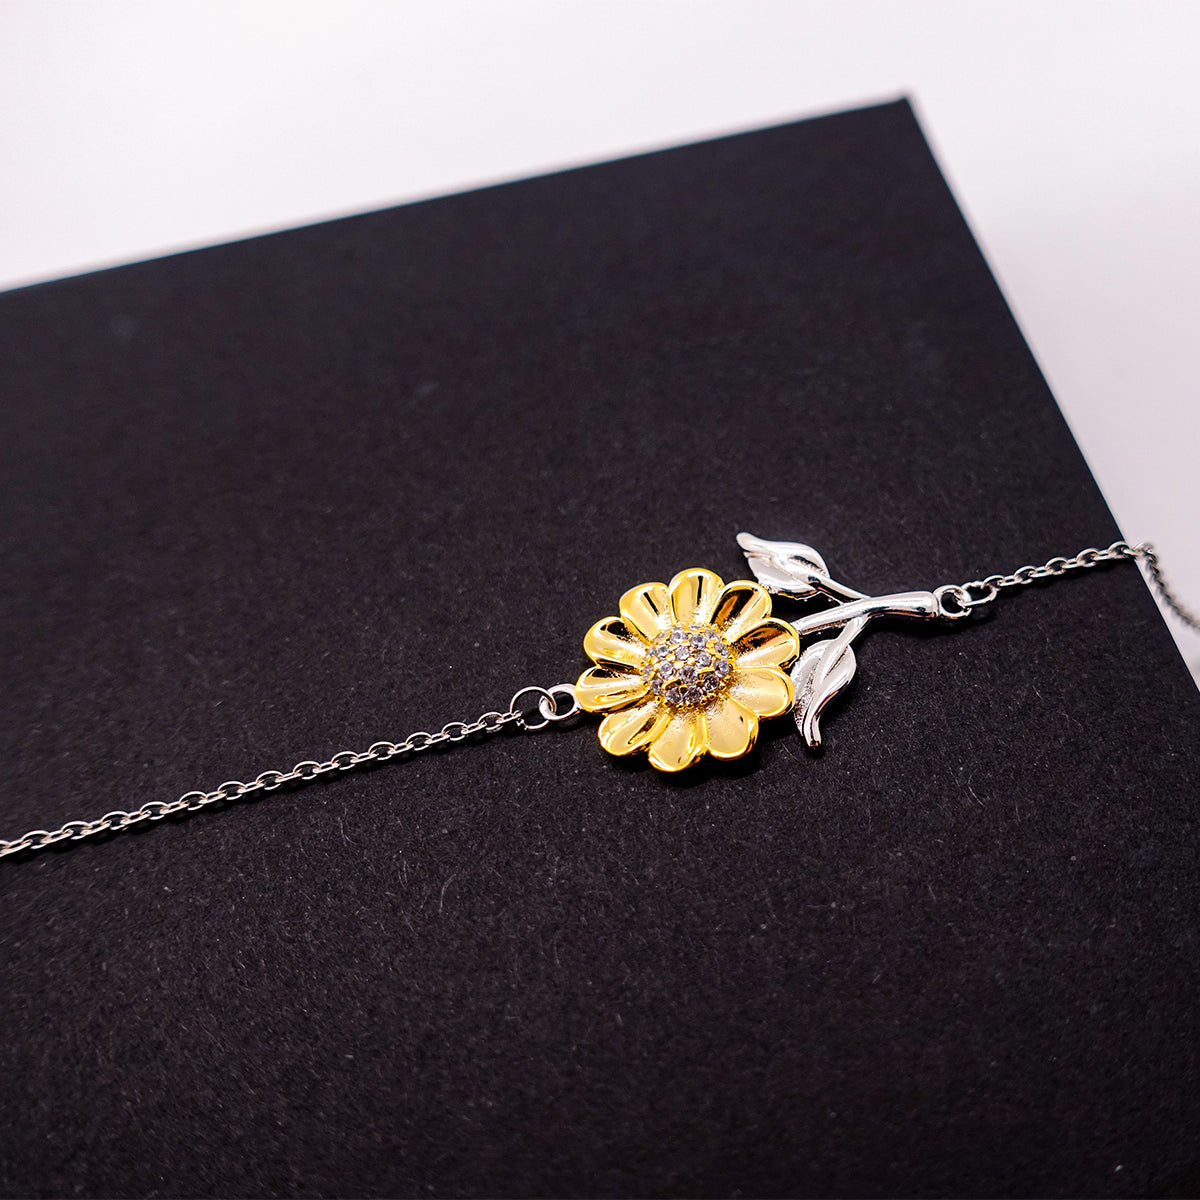 Heartwarming Sunflower Bracelet Retirement Coworkers Gifts for Physical Therapist, Physical Therapist May You be proud of the work you do, the person you are Gifts for Boss Men Women Friends